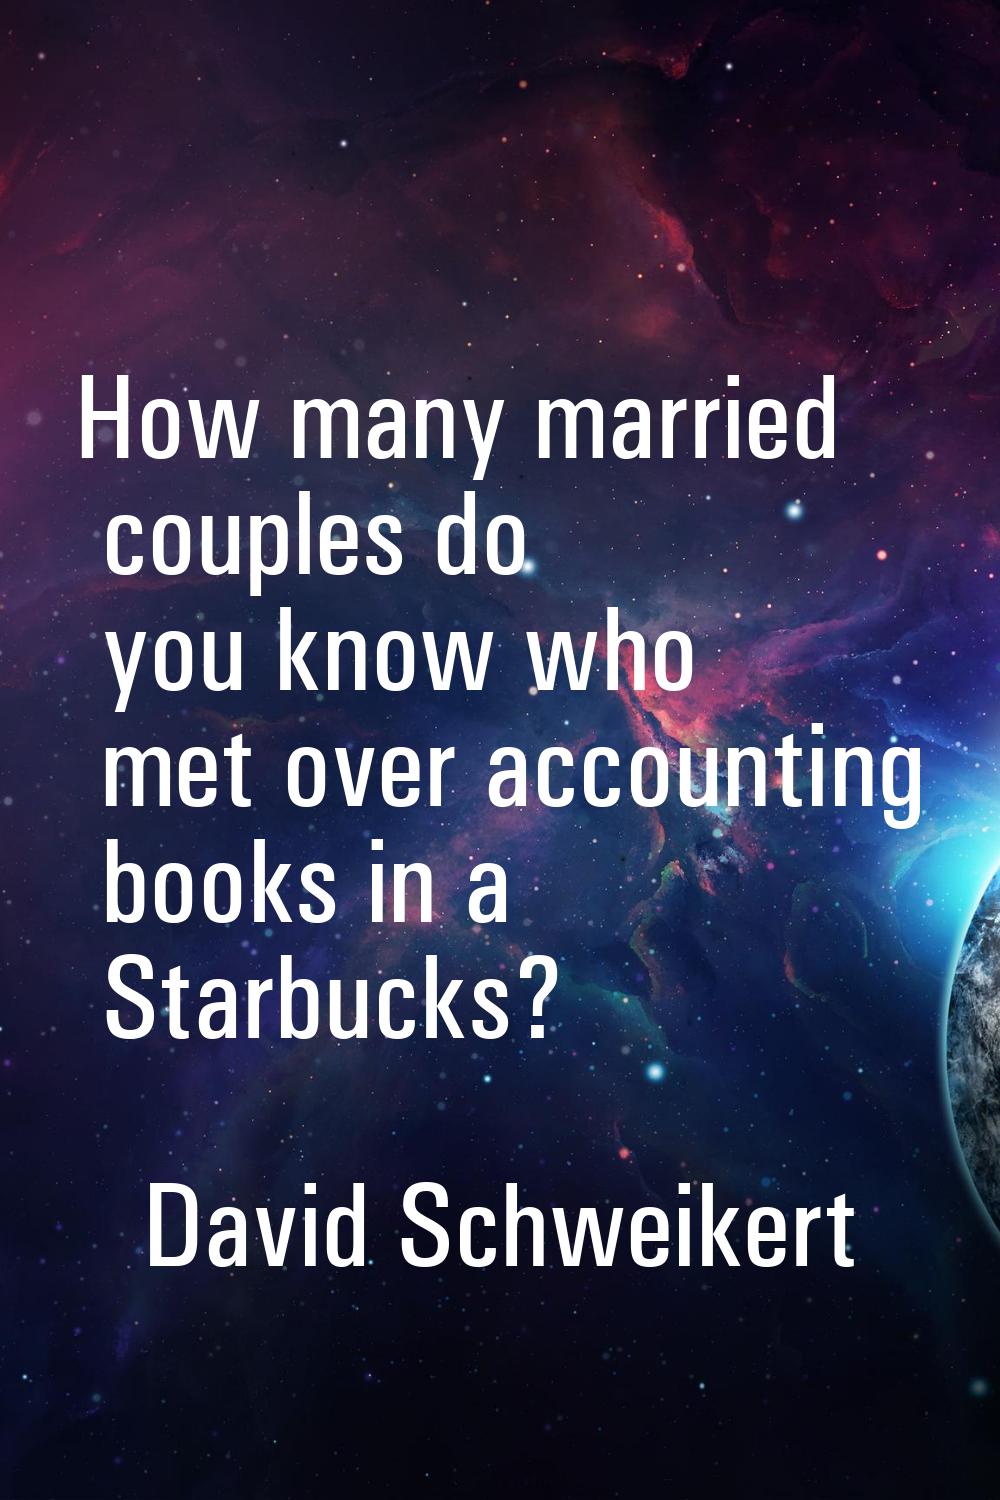 How many married couples do you know who met over accounting books in a Starbucks?